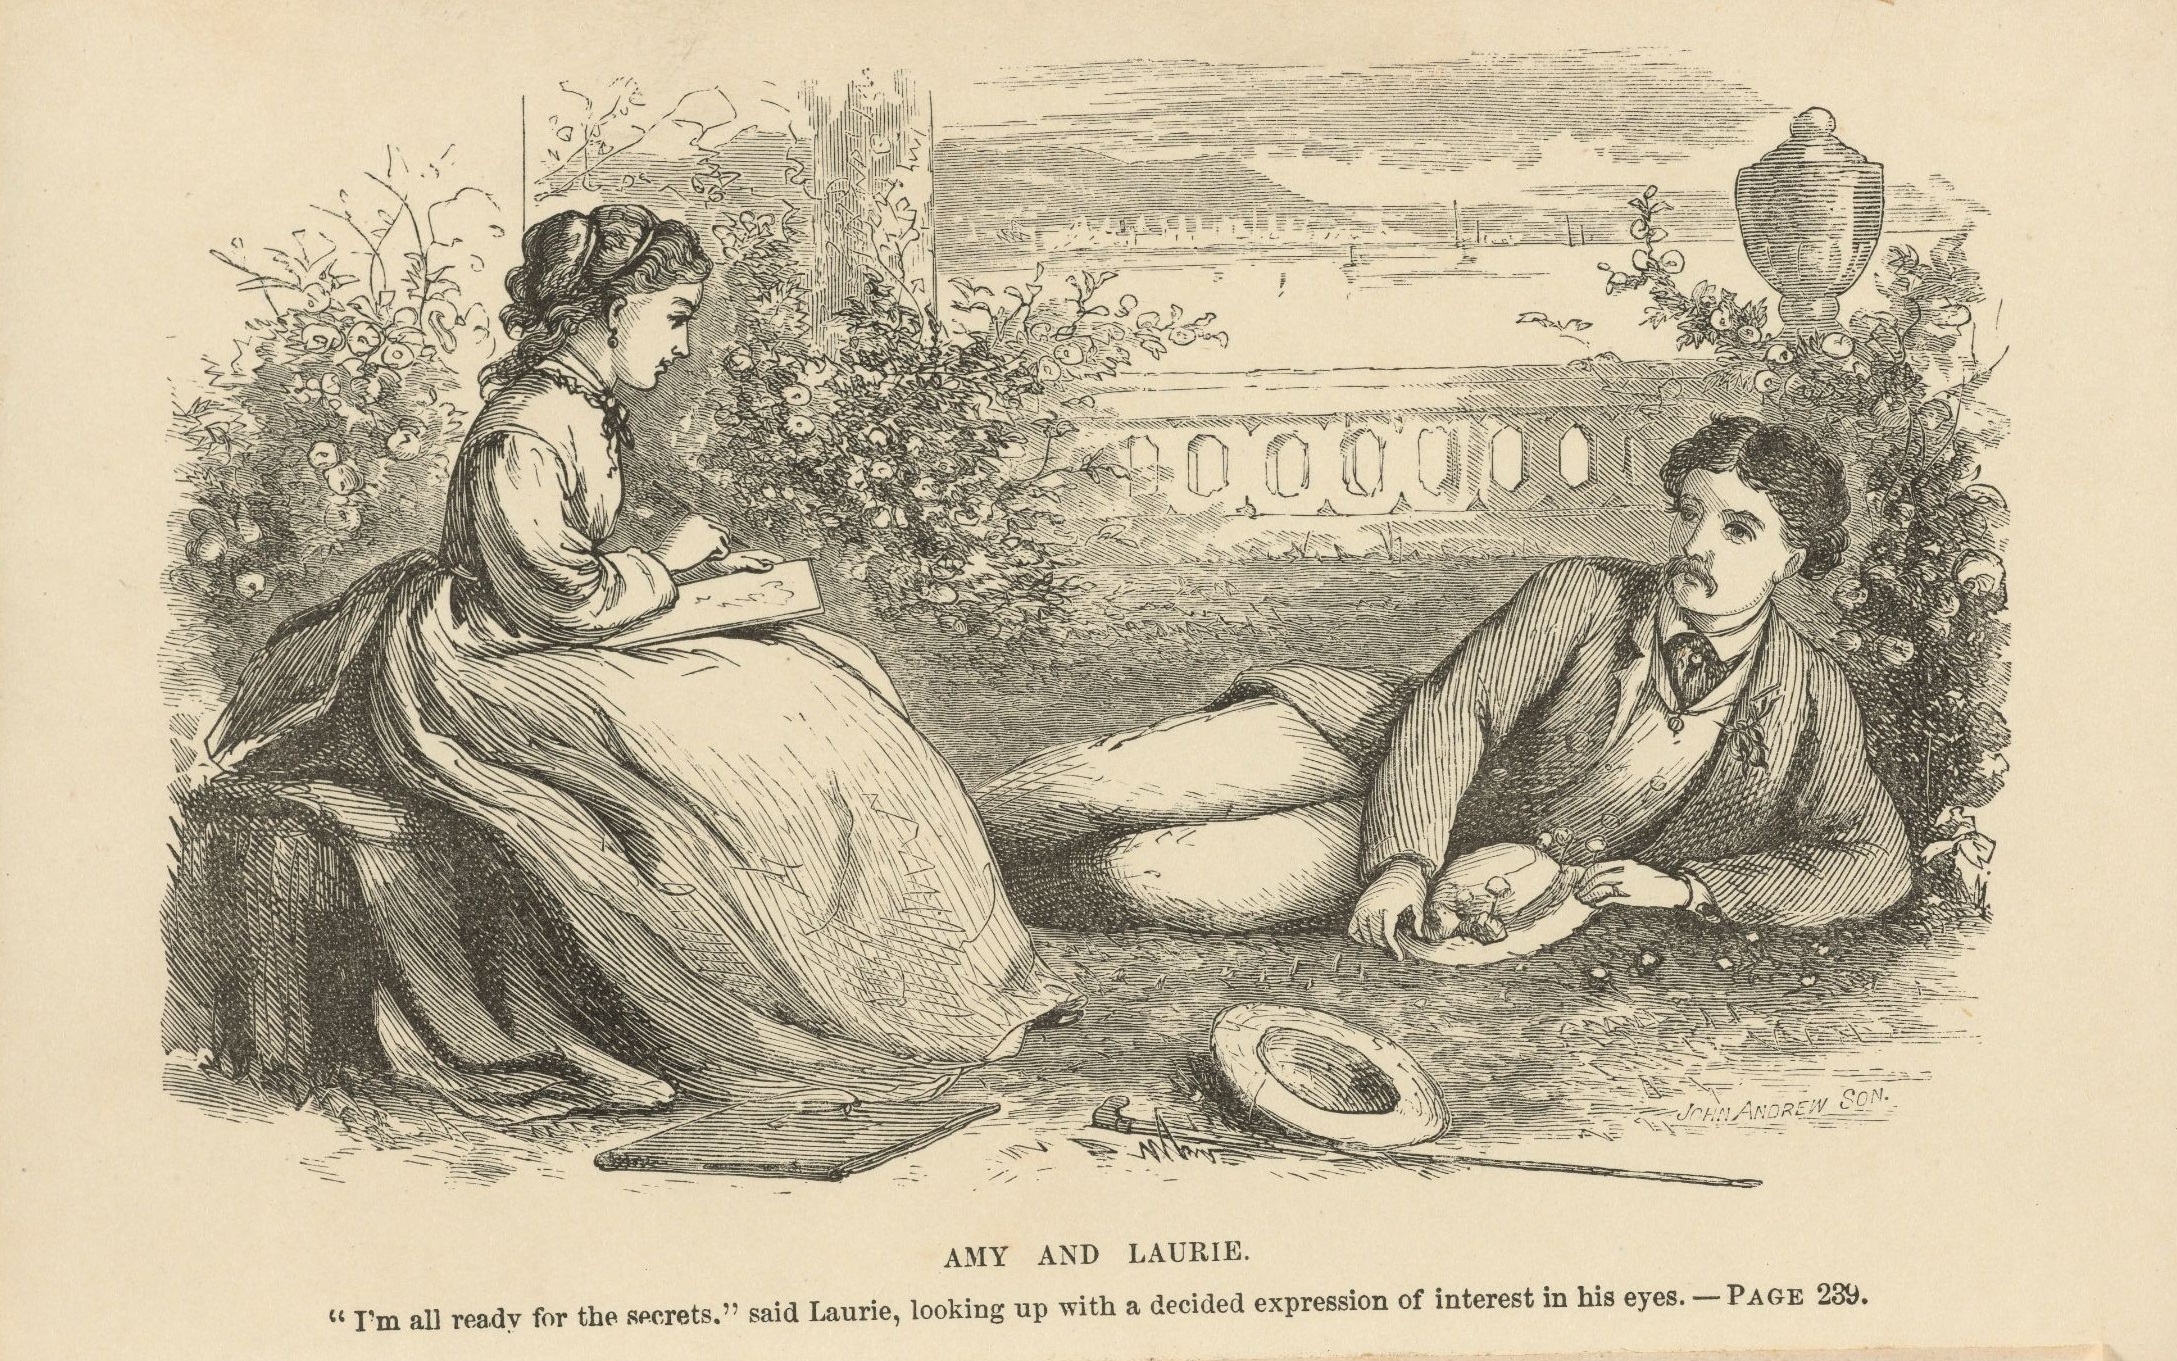 Frontispiece illustration from part 2 of Little Women by Louisa May Alcott (1832-1888), illustrated by her sister May Alcott. Boston: Roberts Brothers, 1869. *AC85.Aℓ194L.1869 pt.2aa, Houghton Library,